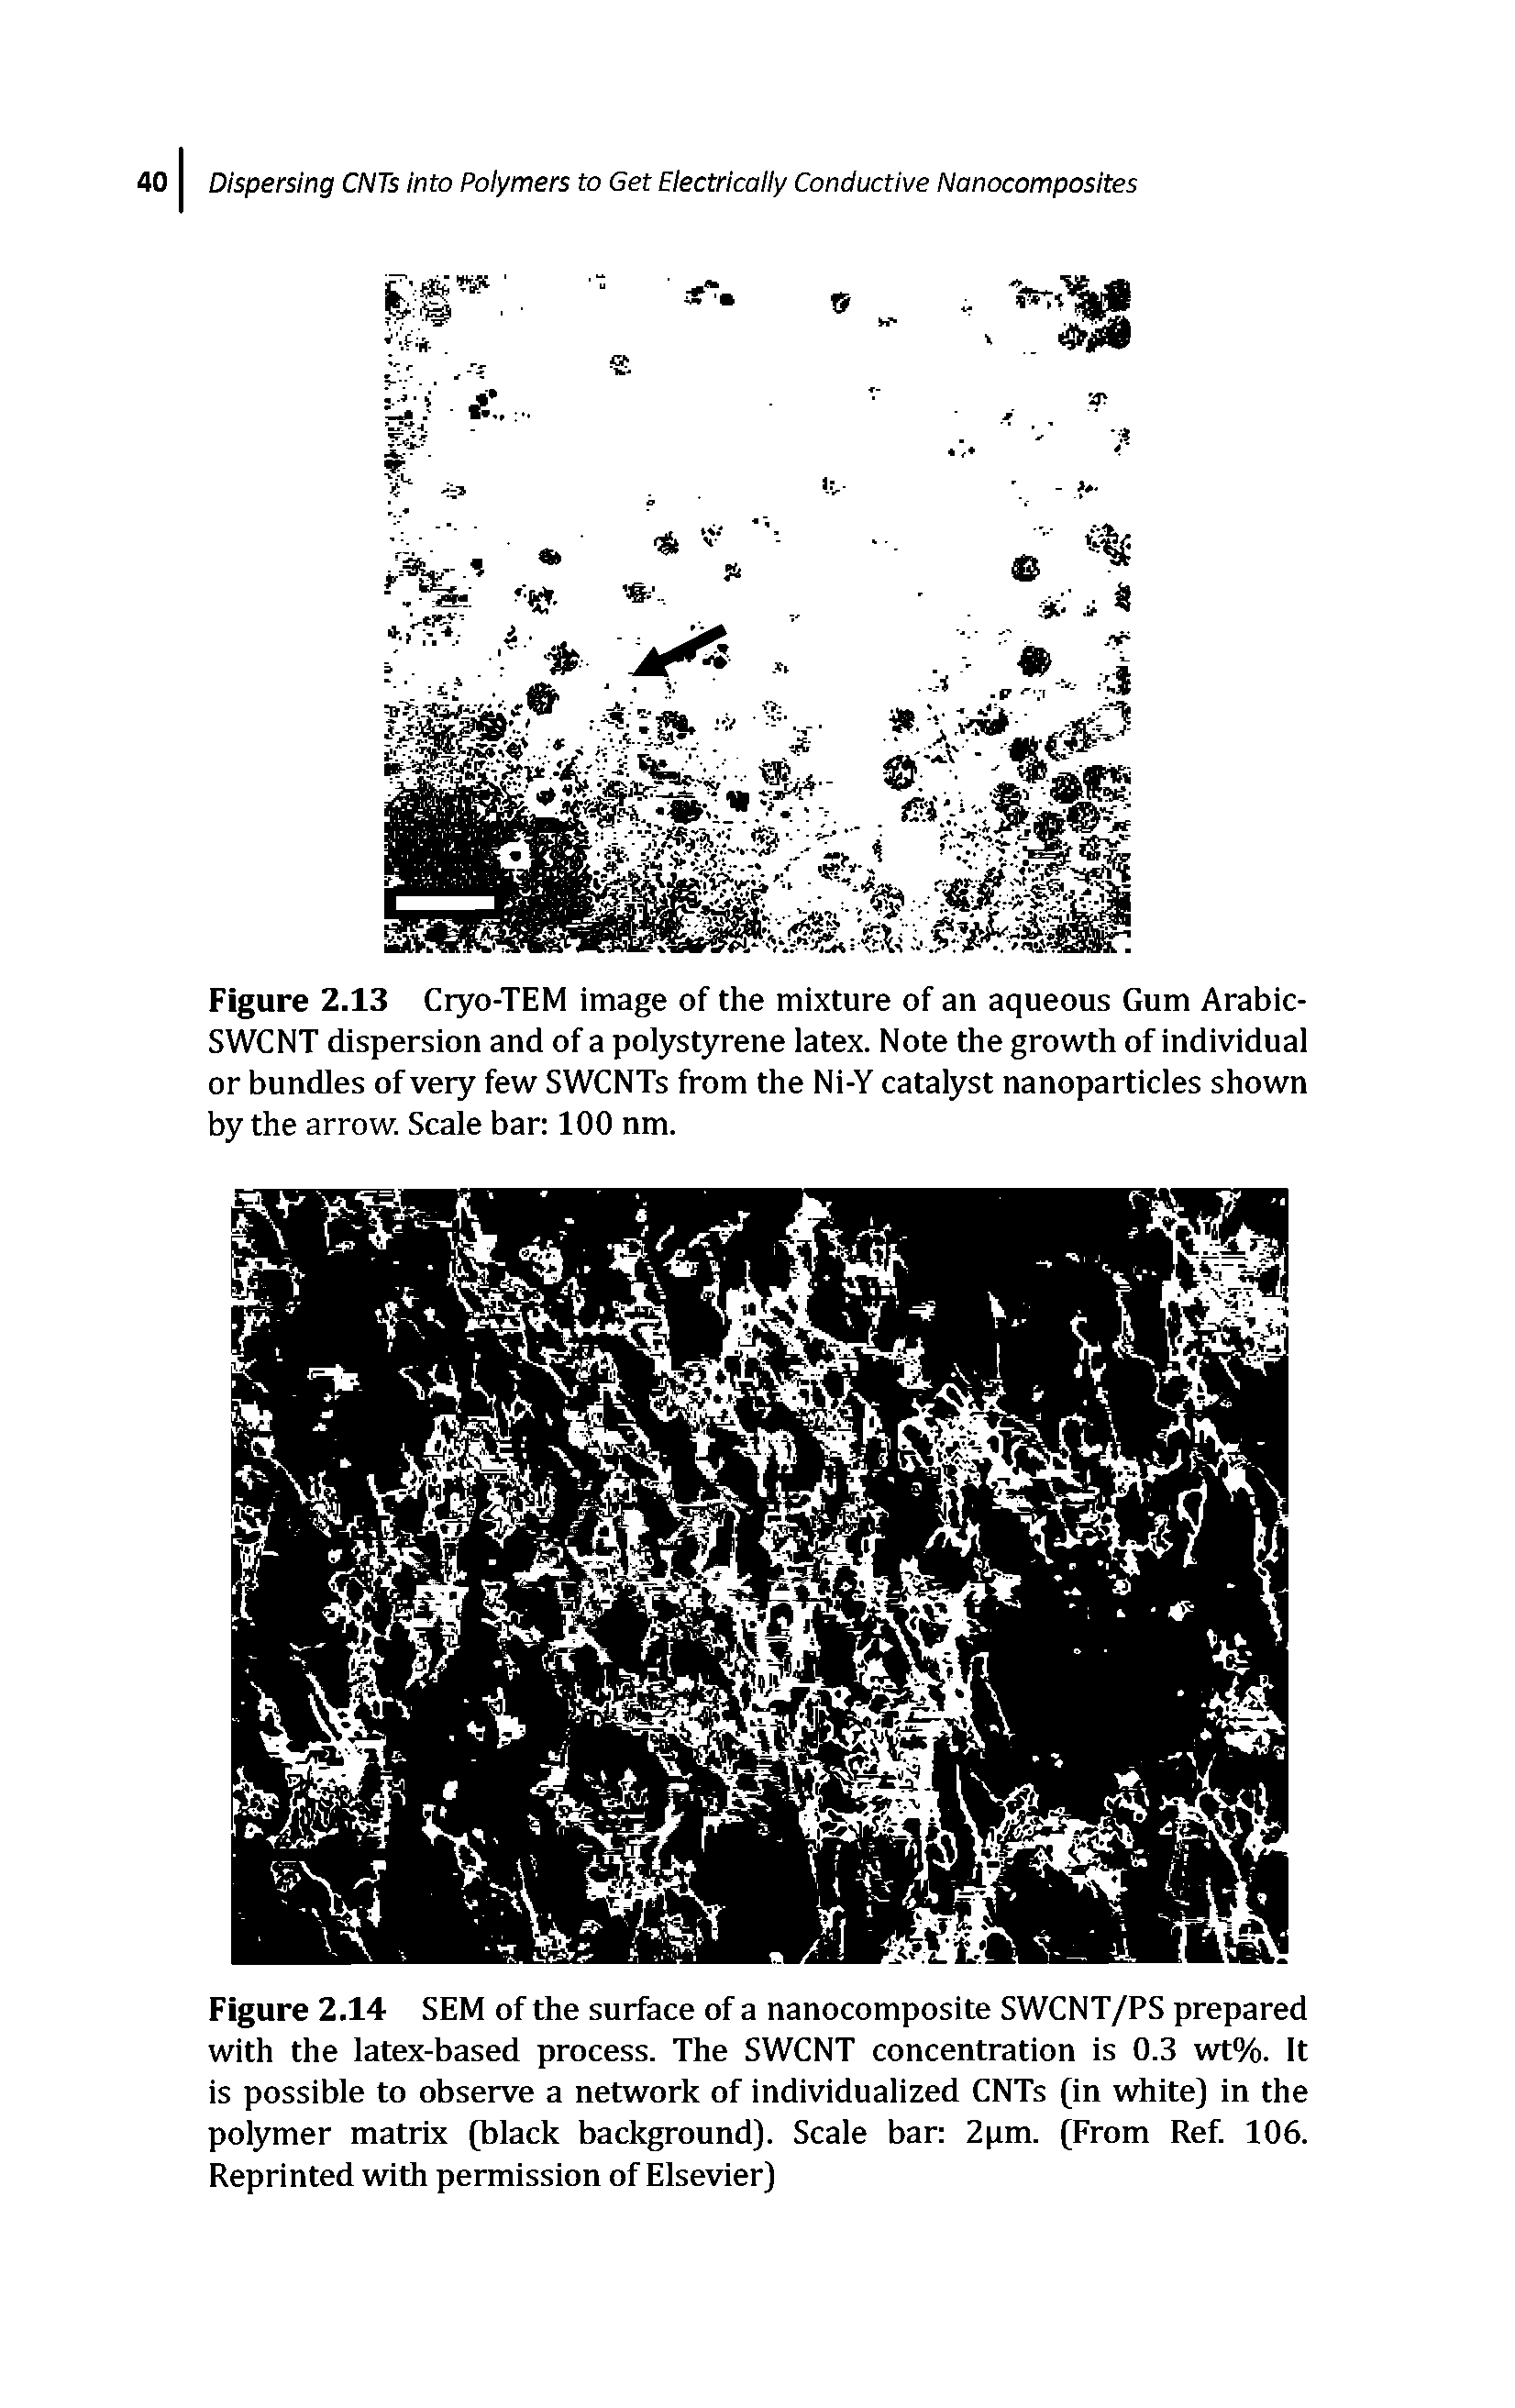 Figure 2.13 Ciyo-TEM image of the mixture of an aqueous Gum Arabic-SWCNT dispersion and of a polystyrene latex. Note the growth of individual or bundles of very few SWCNTs from the Ni-Y catalyst nanoparticles shown by the arrow. Scale bar 100 nm.